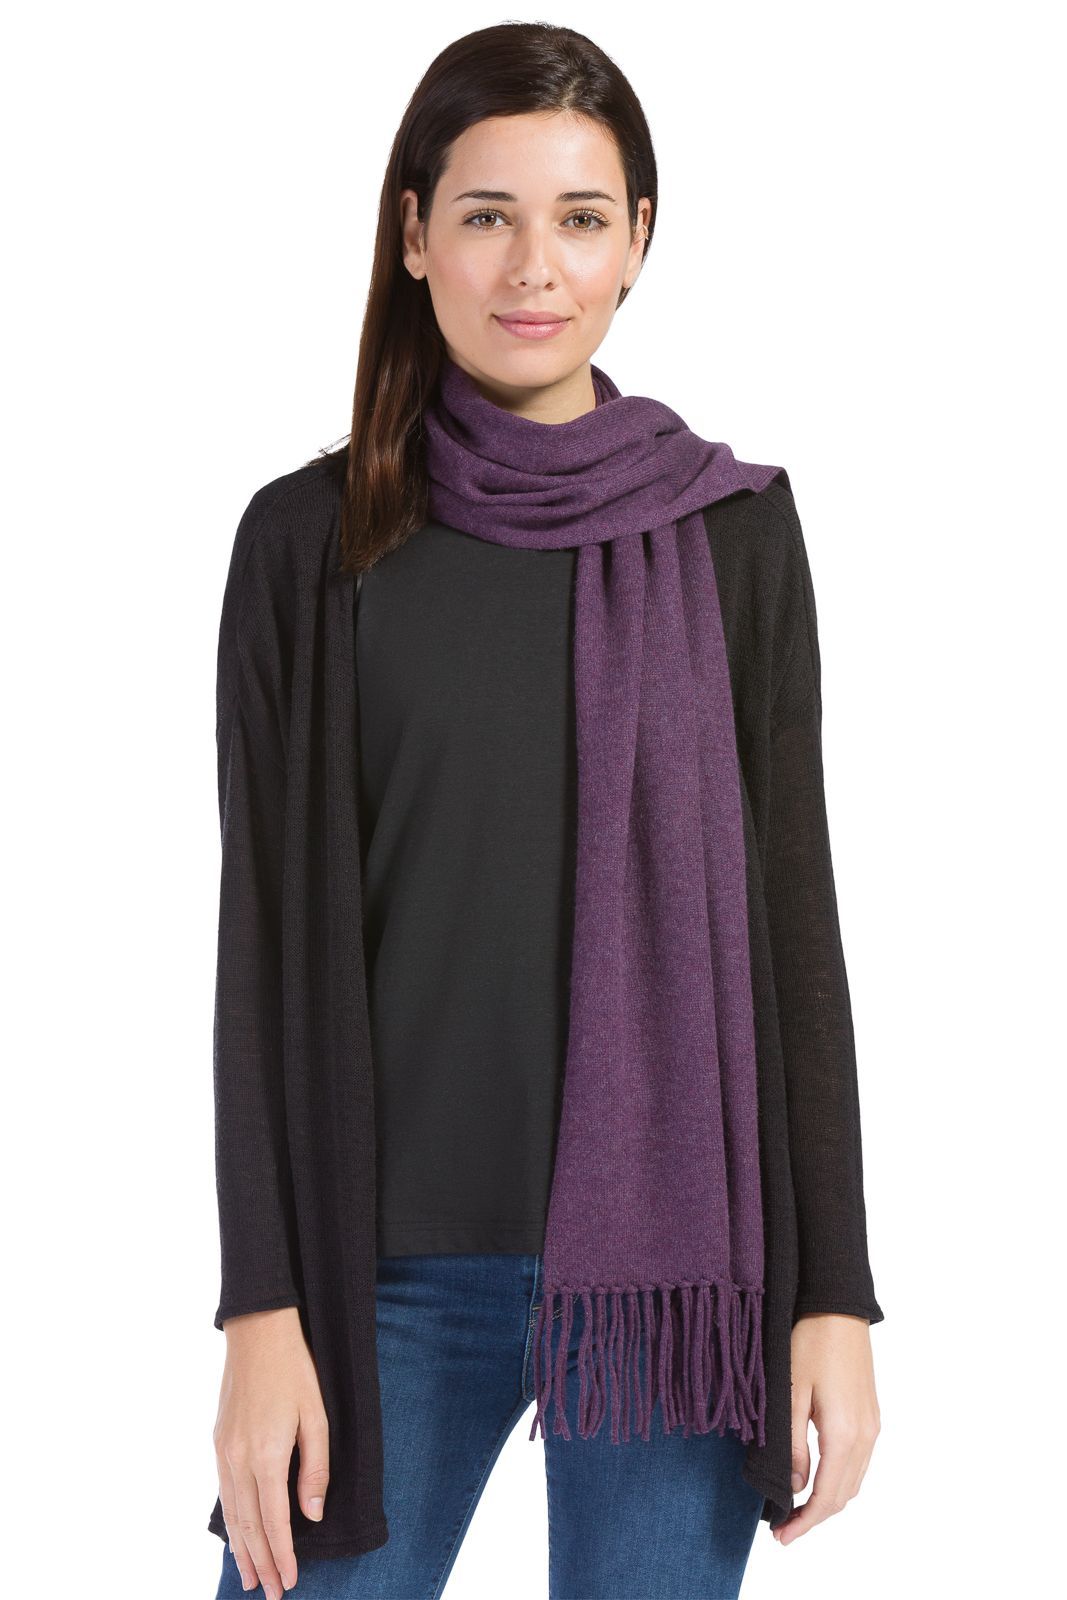 Women's 100% Pure Cashmere Knit Scarf with Fringe and Gift Box Womens>Accessories>Scarf Fishers Finery Eggplant 